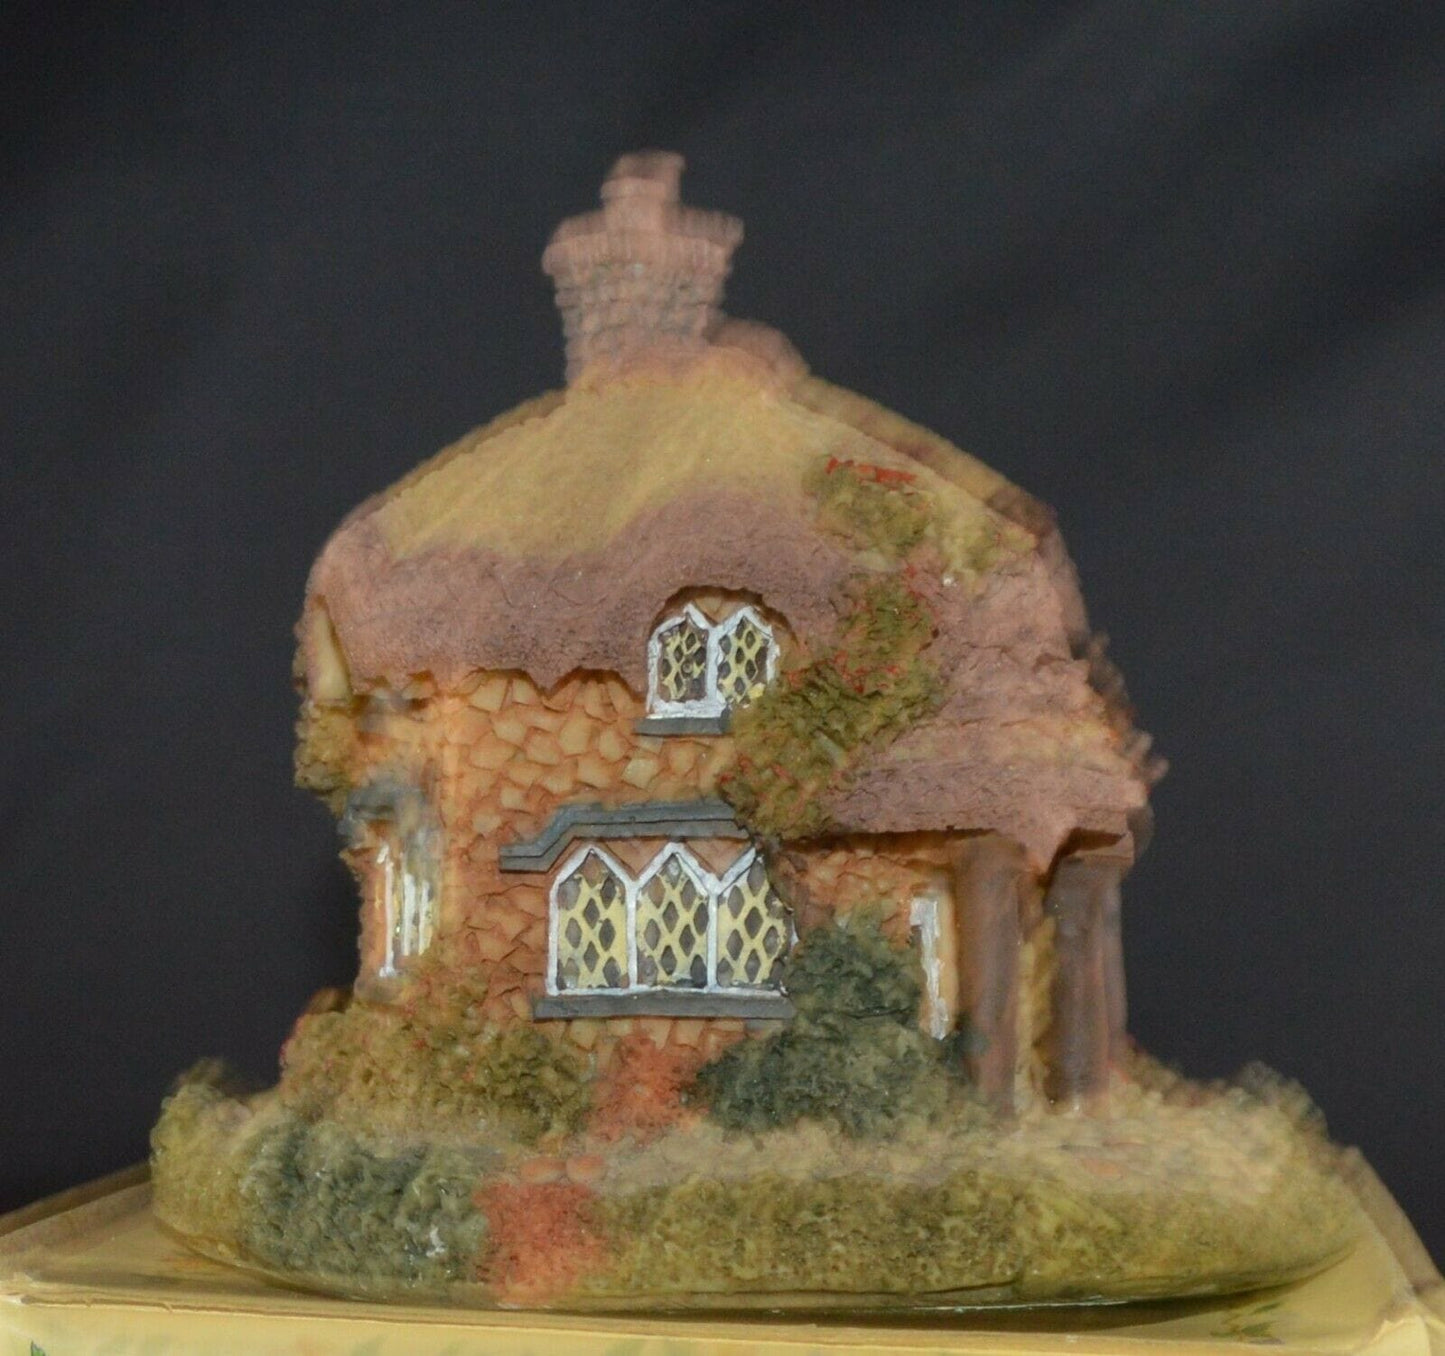 SIX LITTLE MEADOW SERIES ORNAMENTAL COTTAGES by SALCO(PREVIOUSLY OWNED) GOOD CONDITION - TMD167207